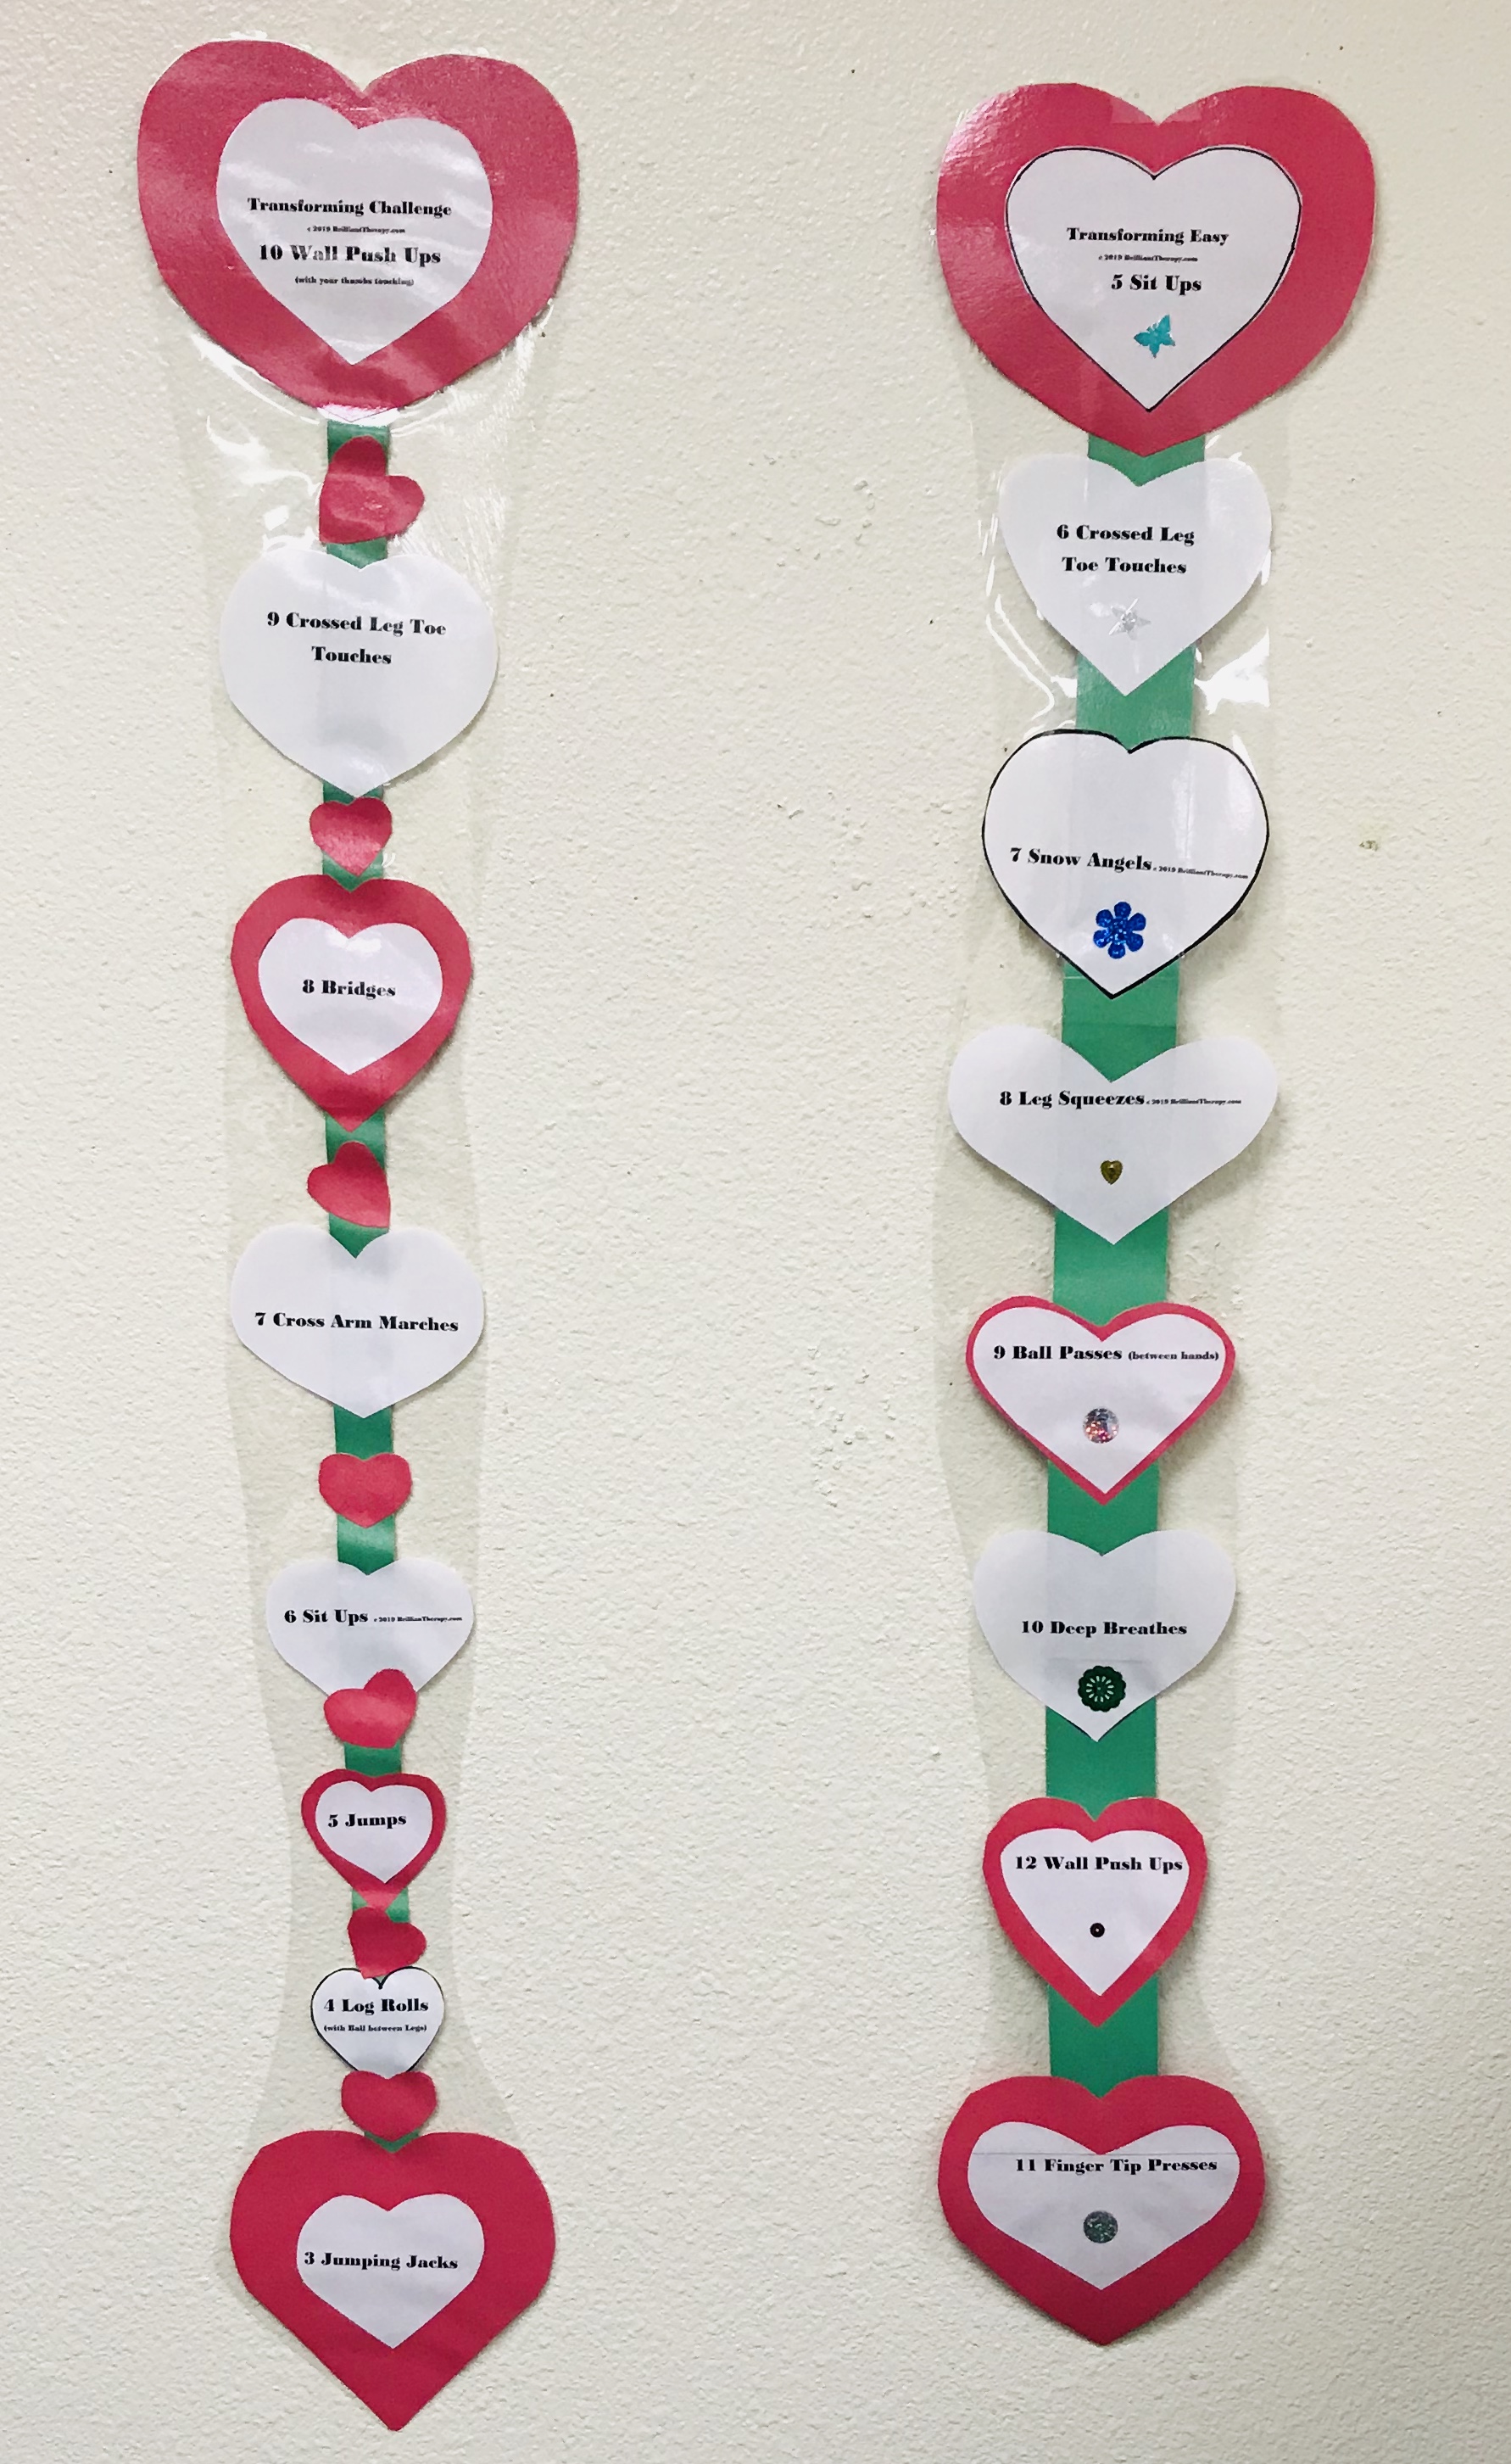 Laminated hearts on strips with various exercises